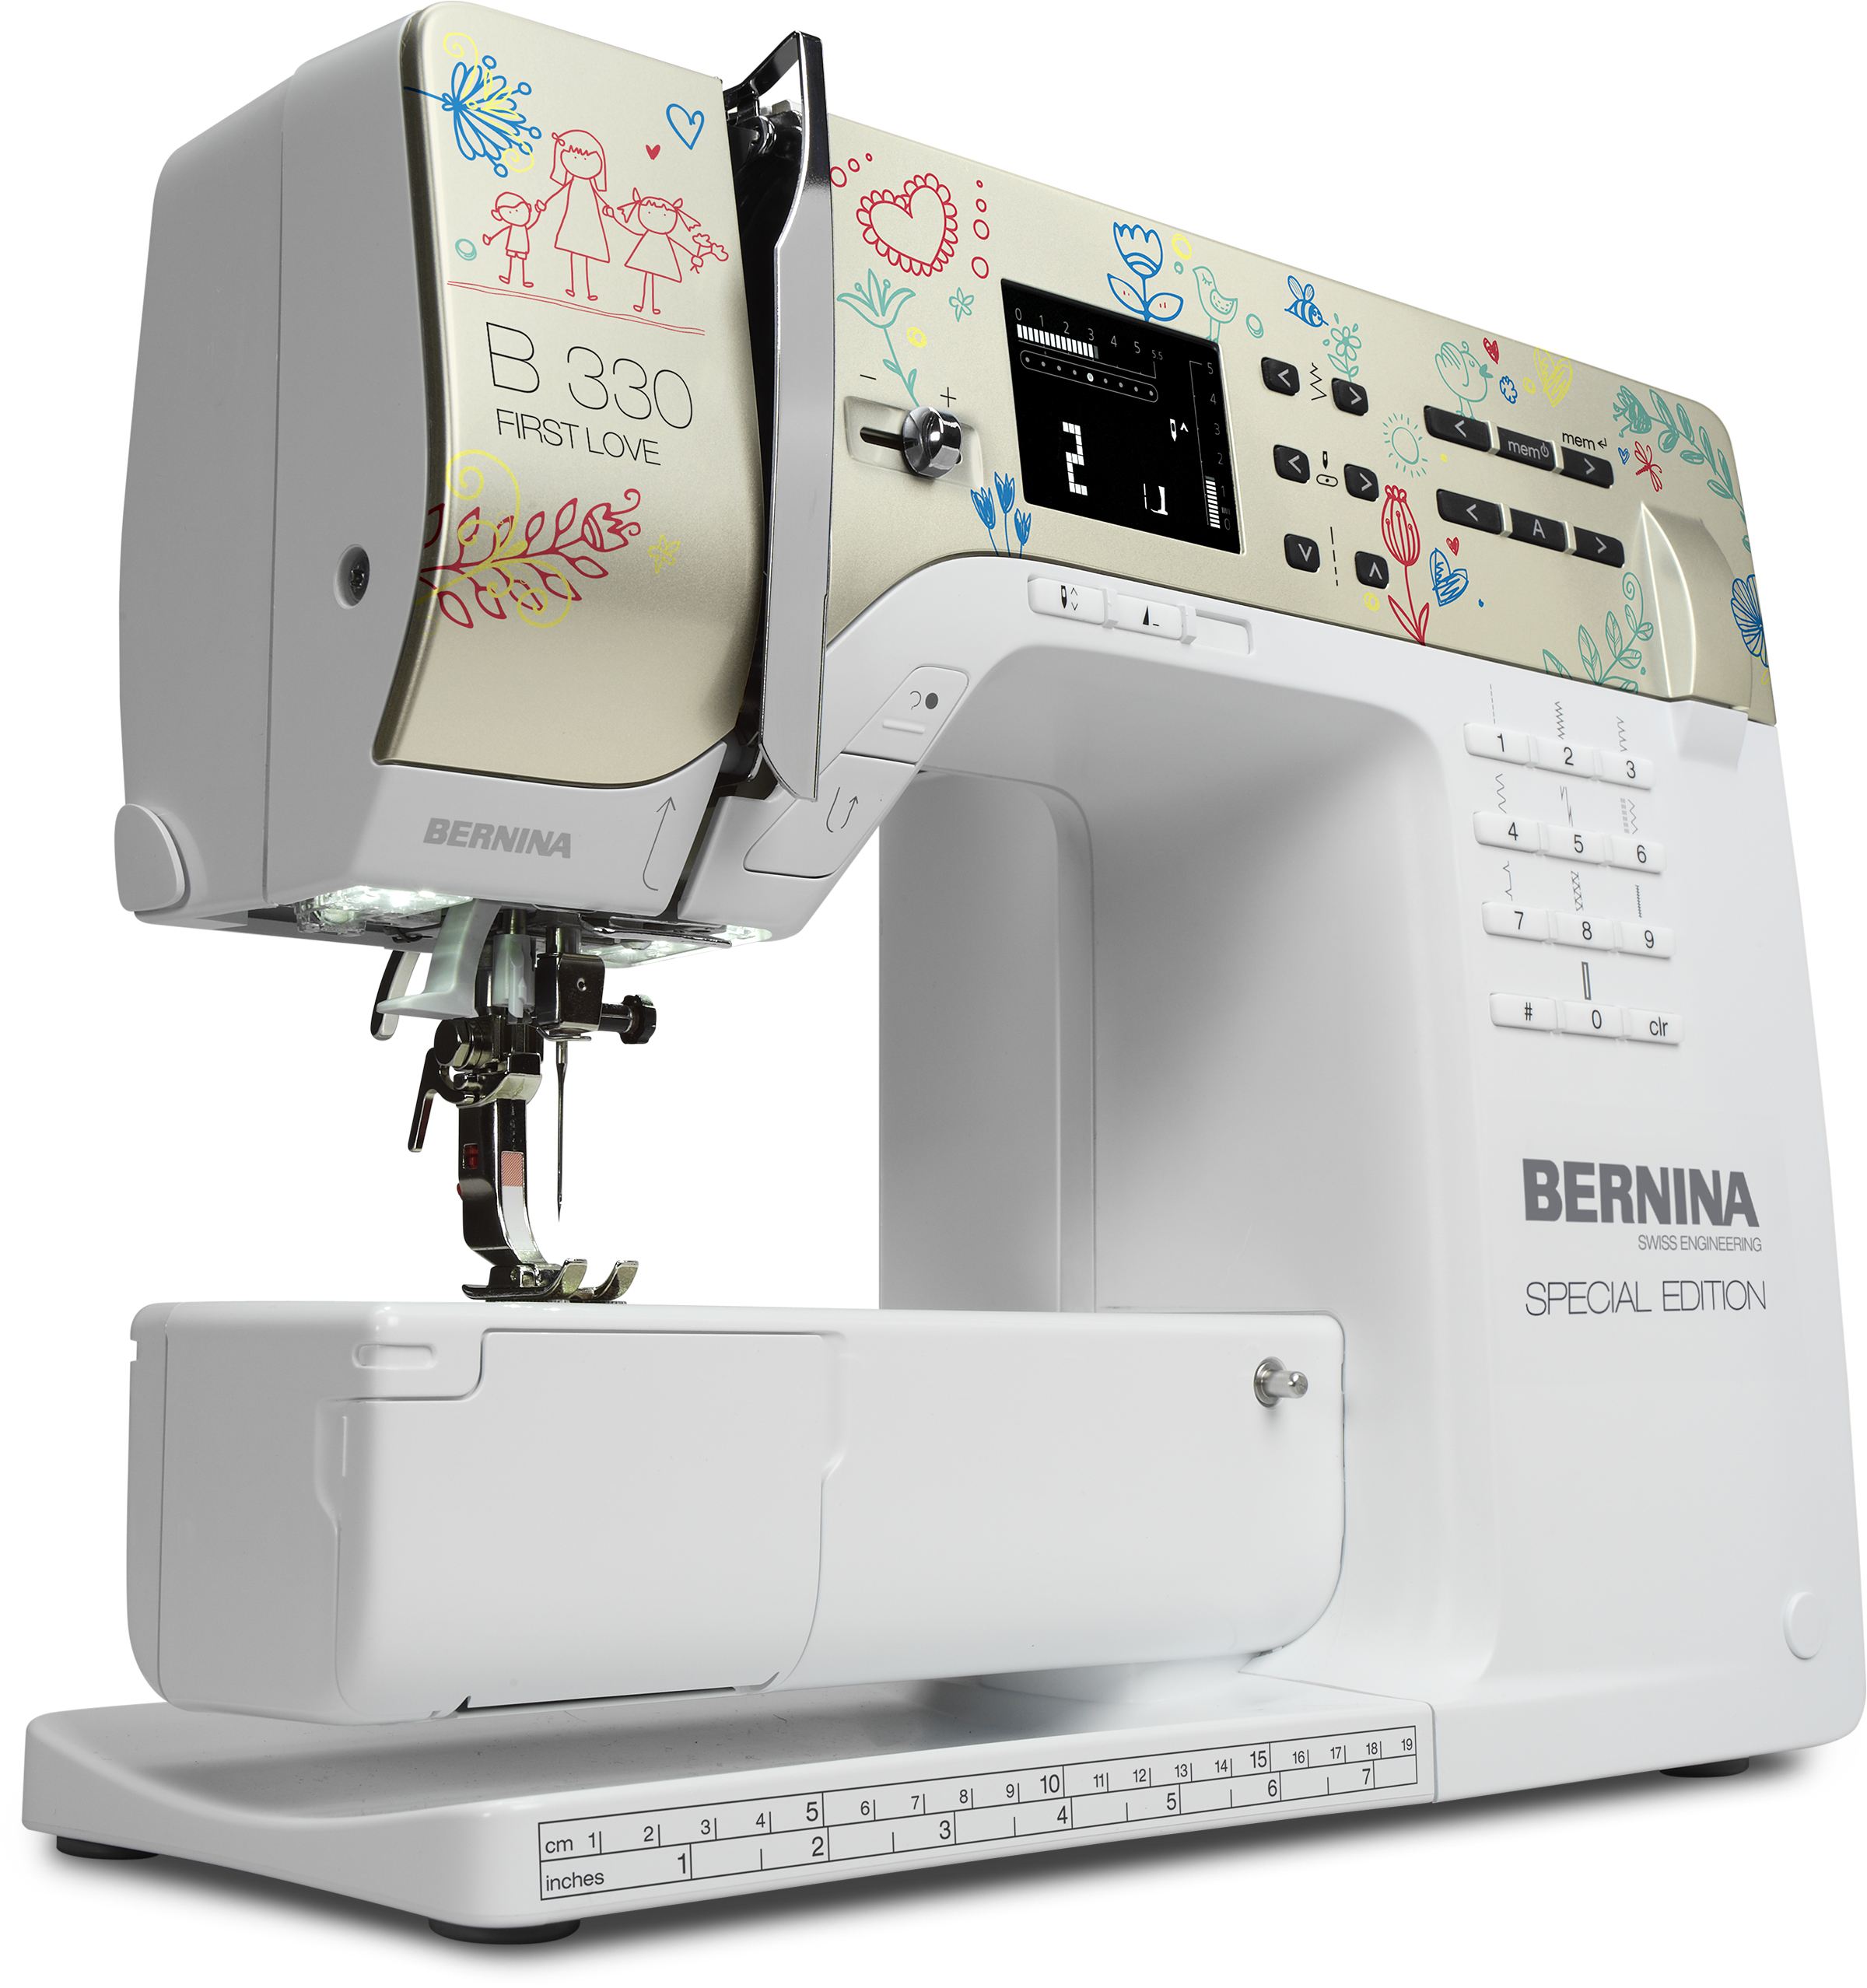 BERNINA 330 Special Edition First Love